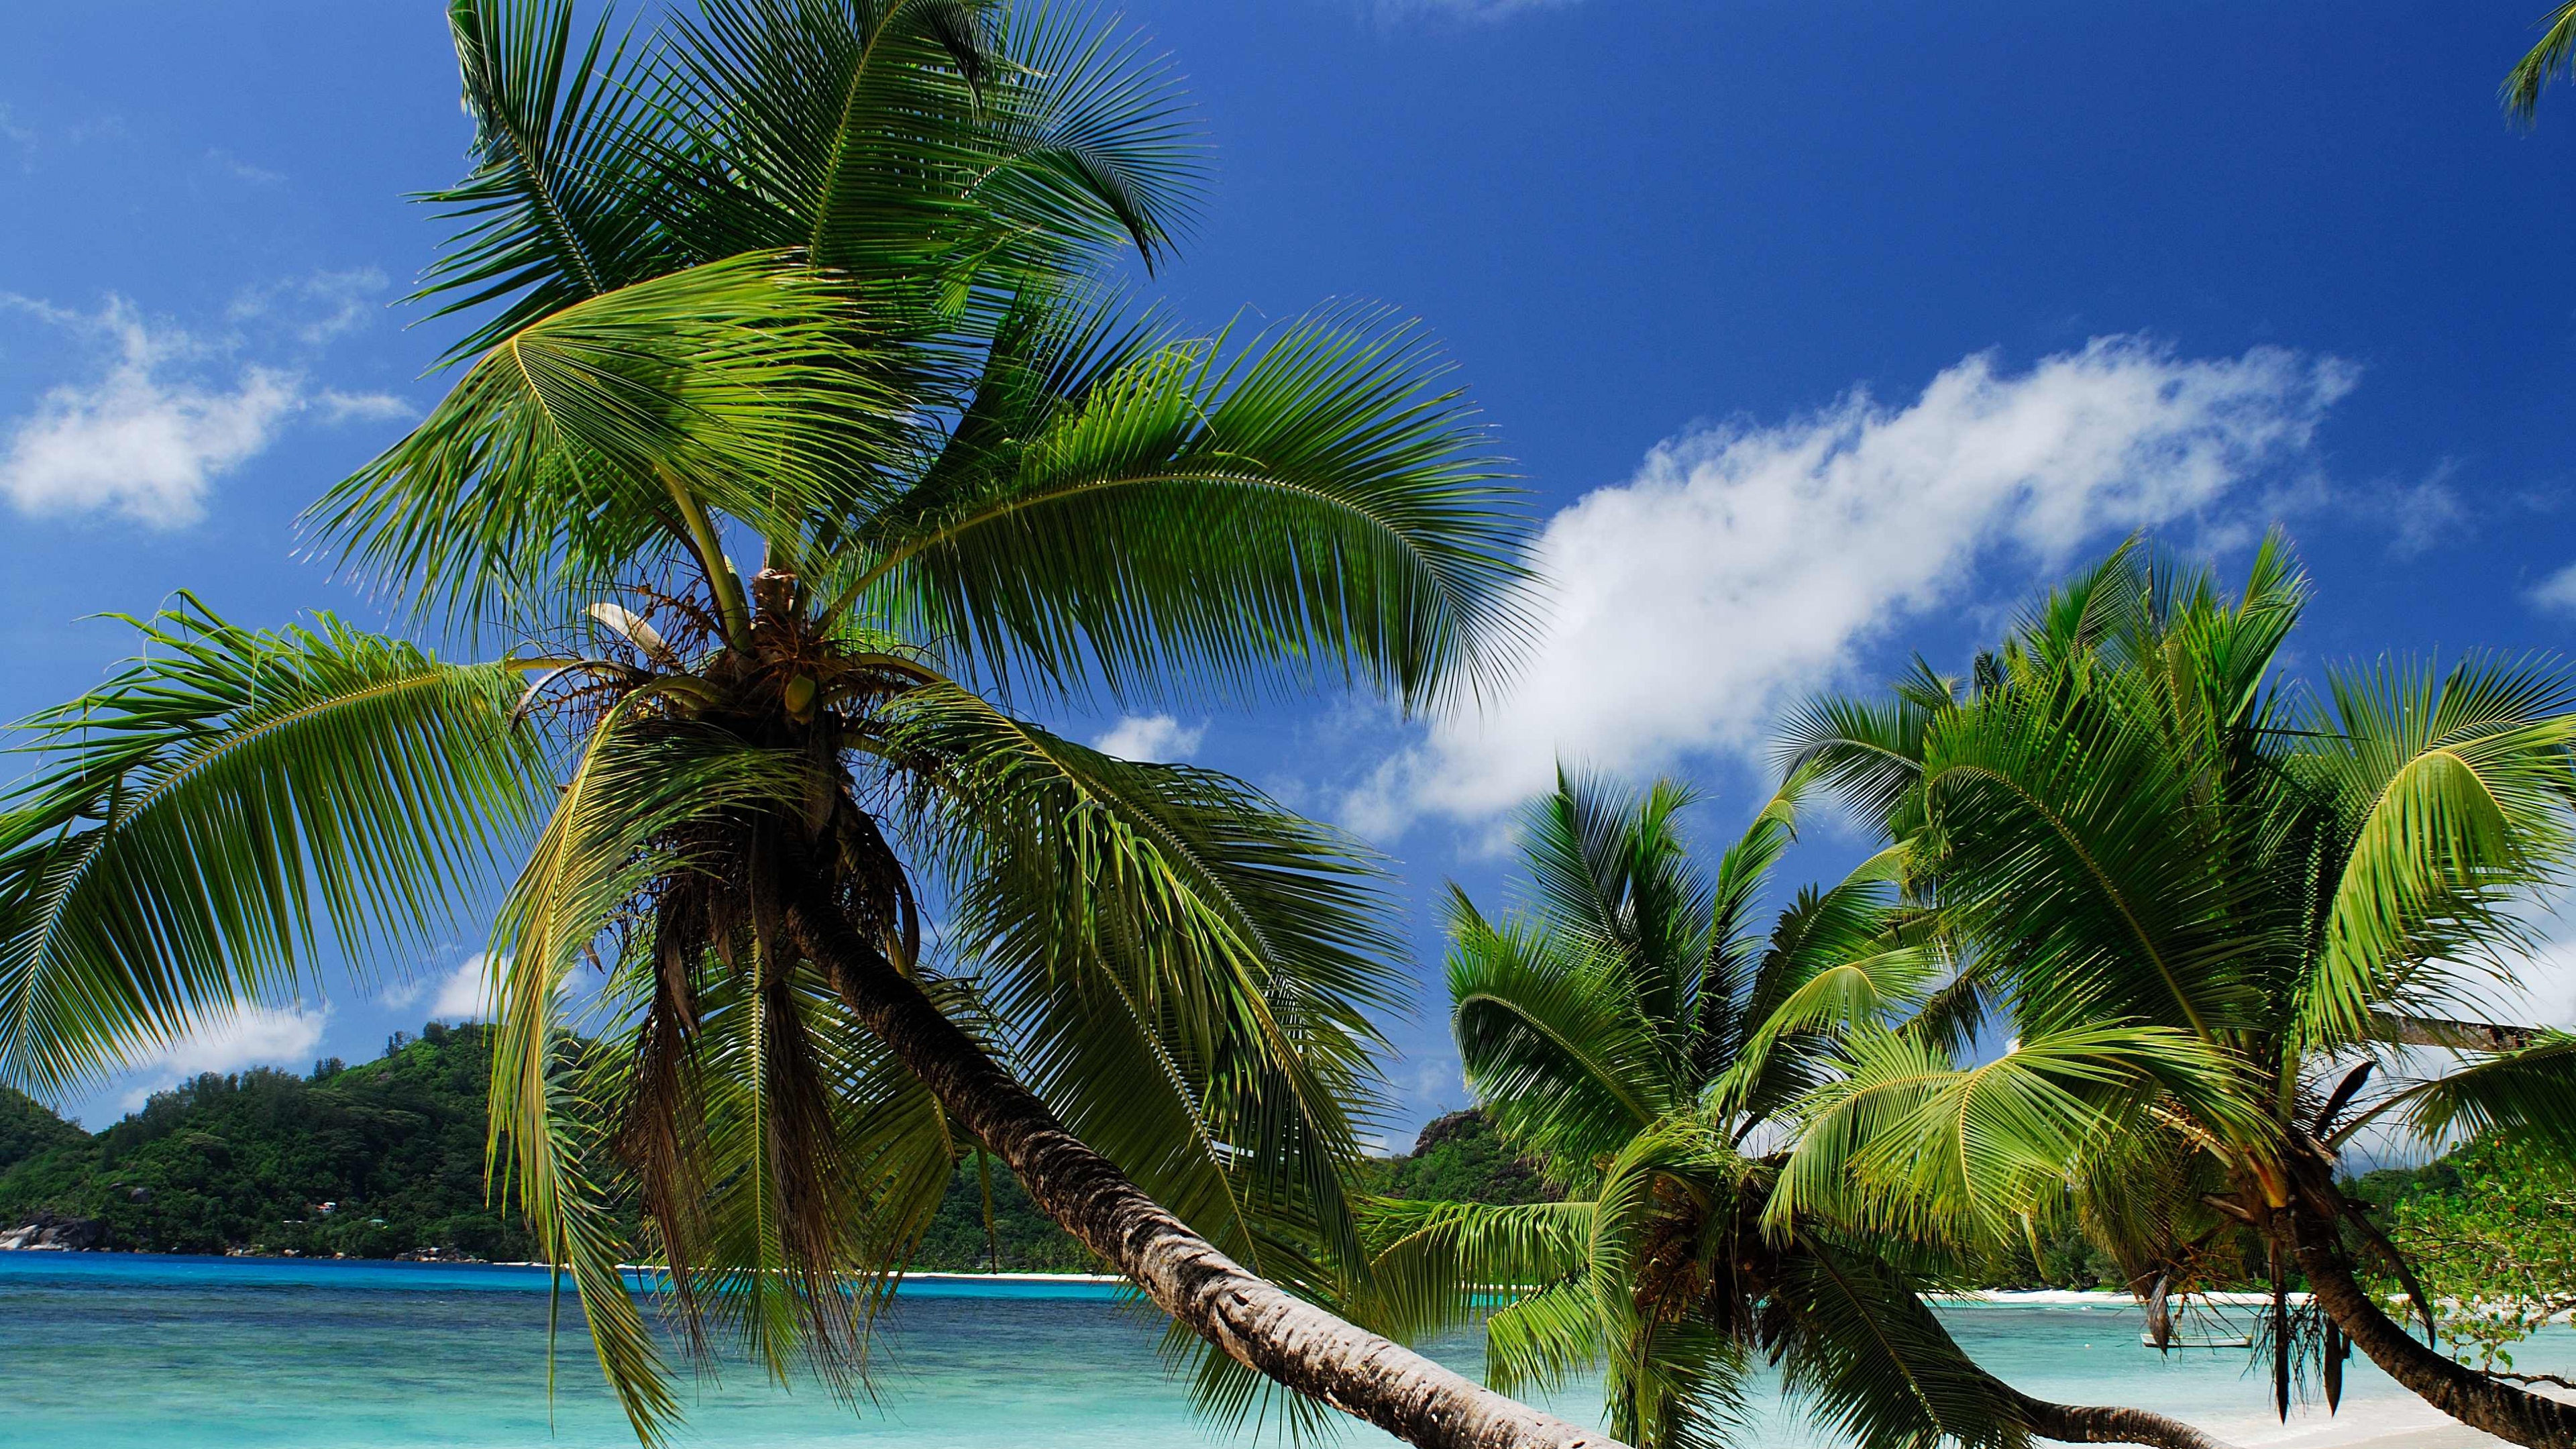 4k Palm Trees Wallpapers High Quality Download Free